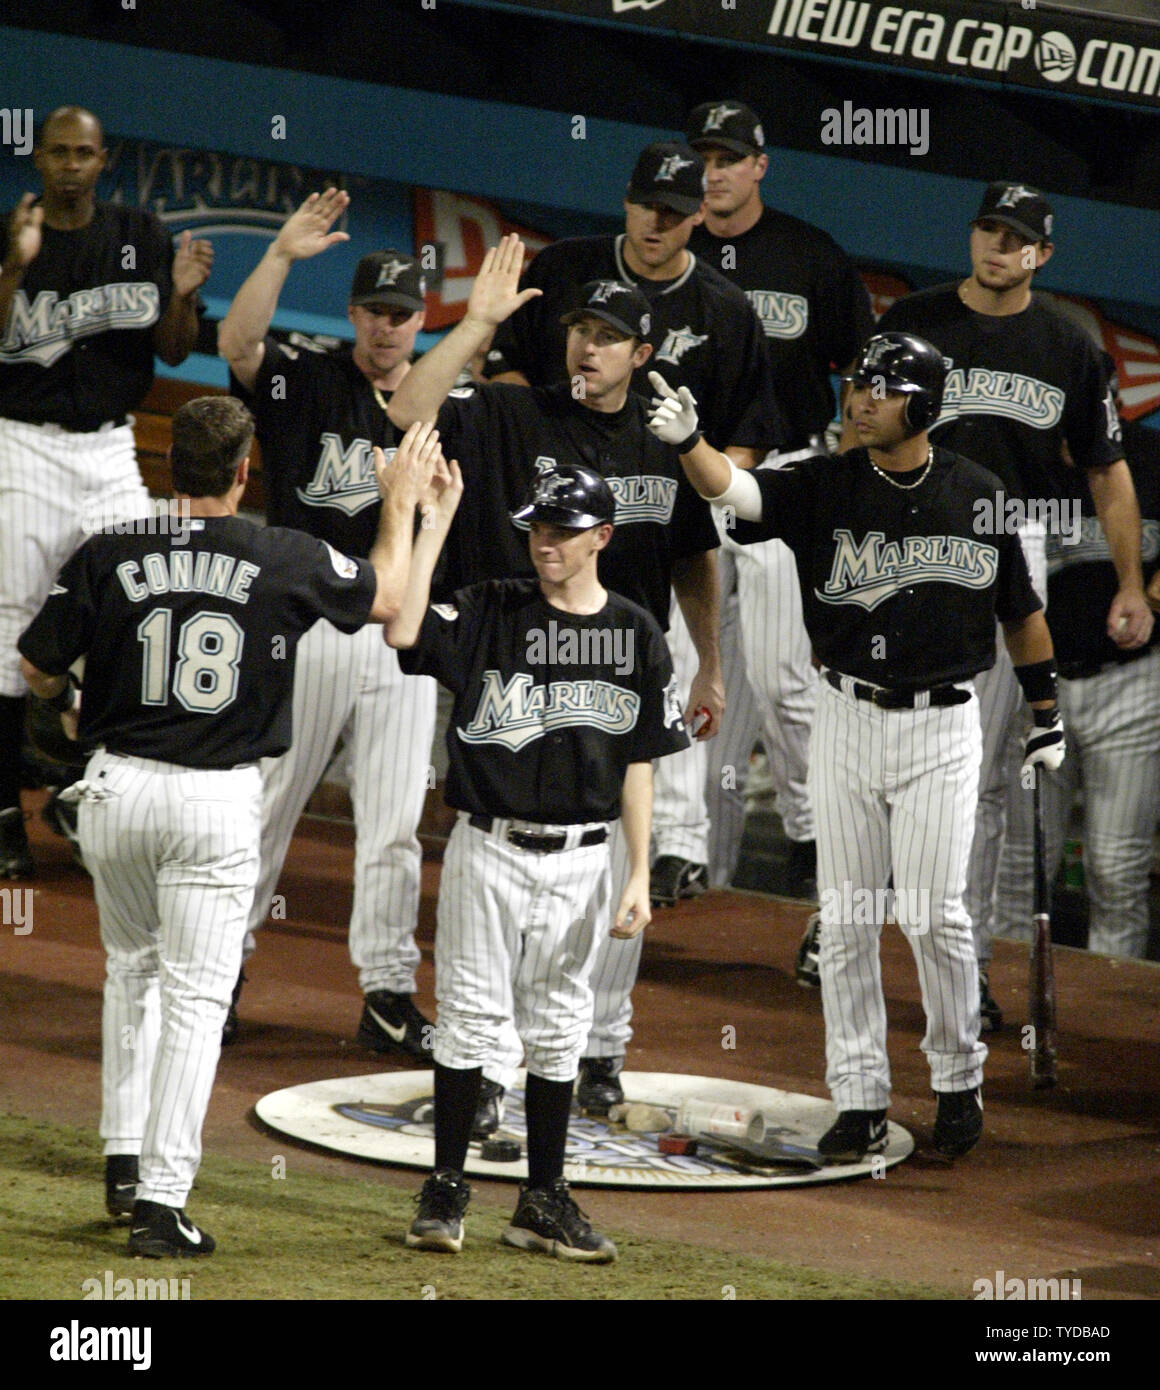 Top moments of the 2003 Marlins, 05/18/2020